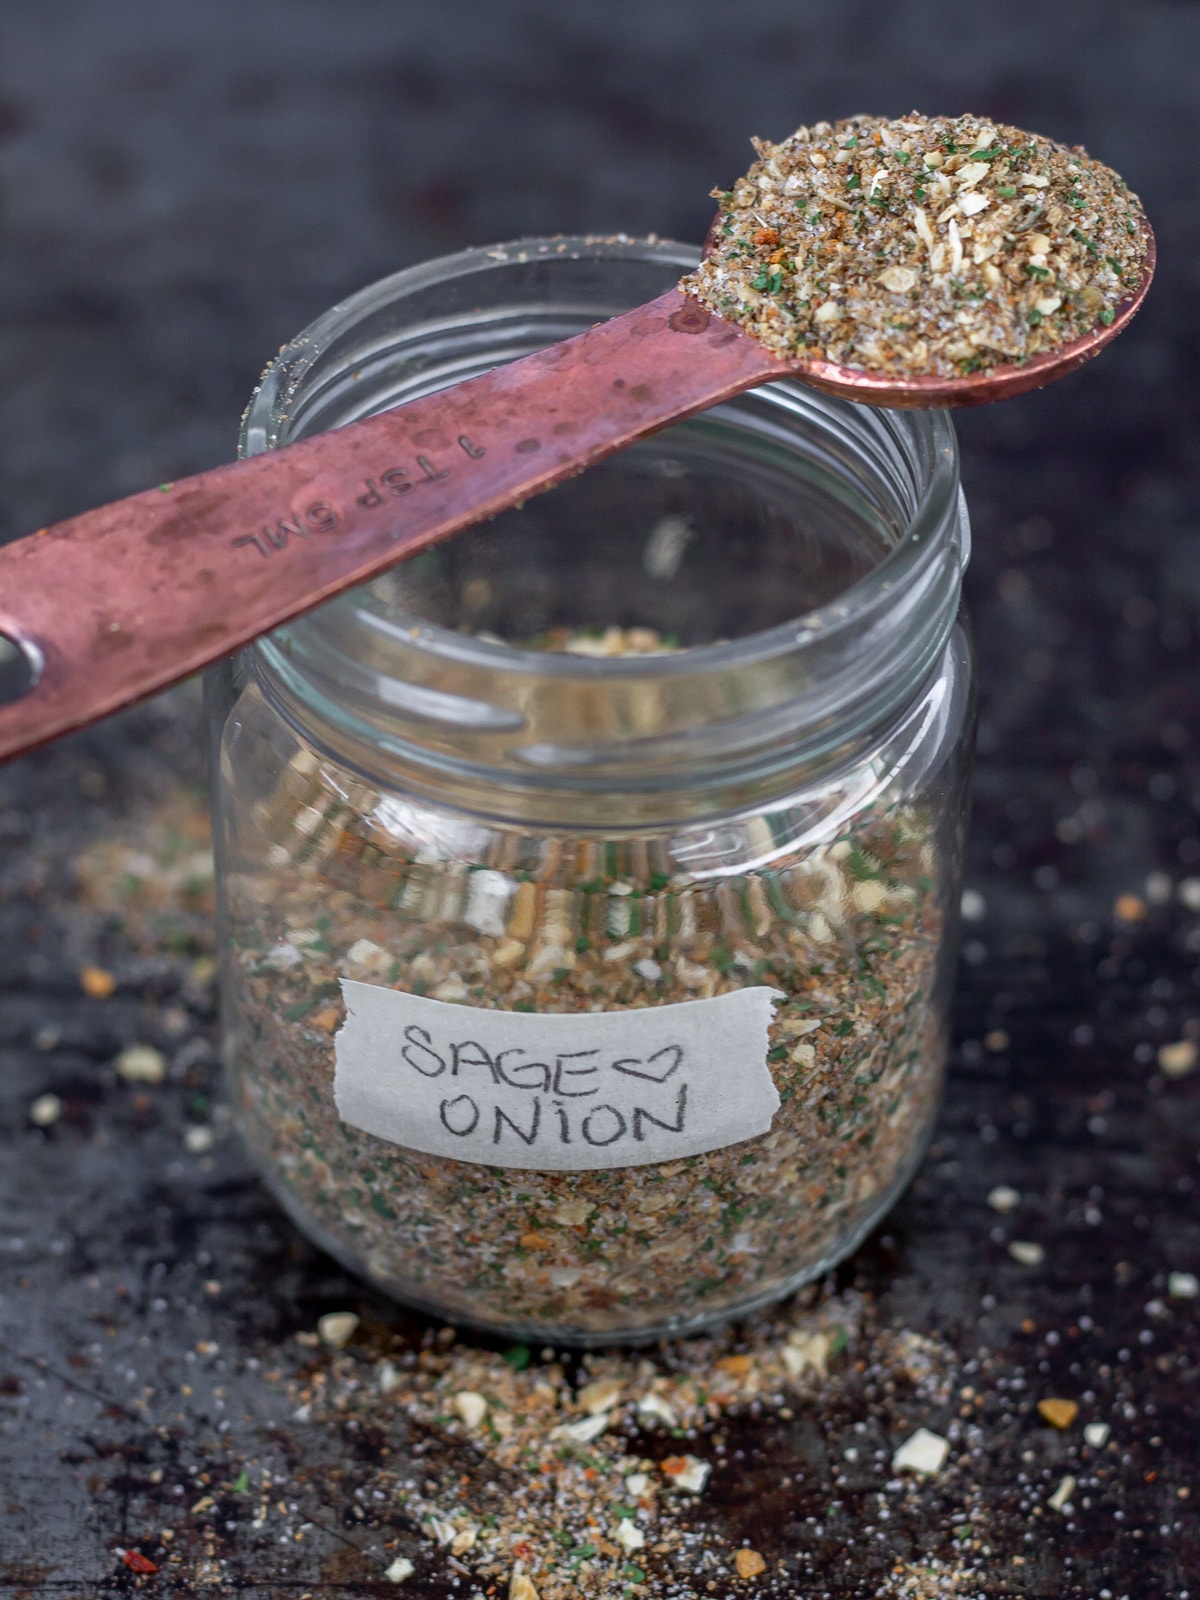 Jar of sage and onion seasoning with measuring spoon on top.